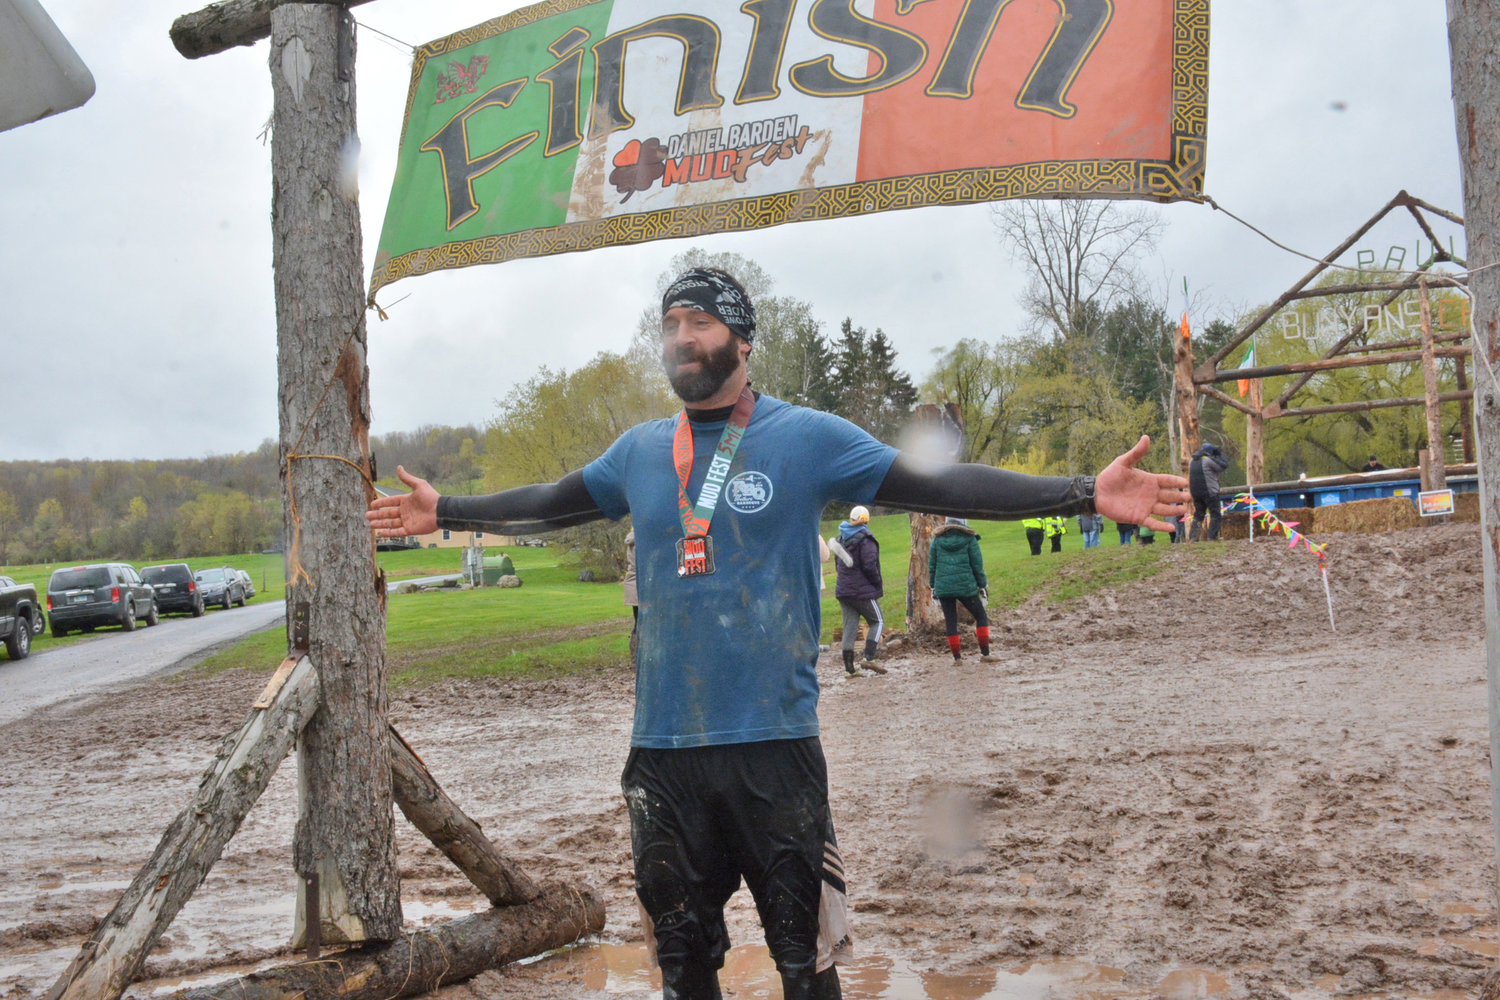 CROSSING THE FINISH LINE — A participant in the 2019 Daniel Barden Mudfest crosses the finish line.